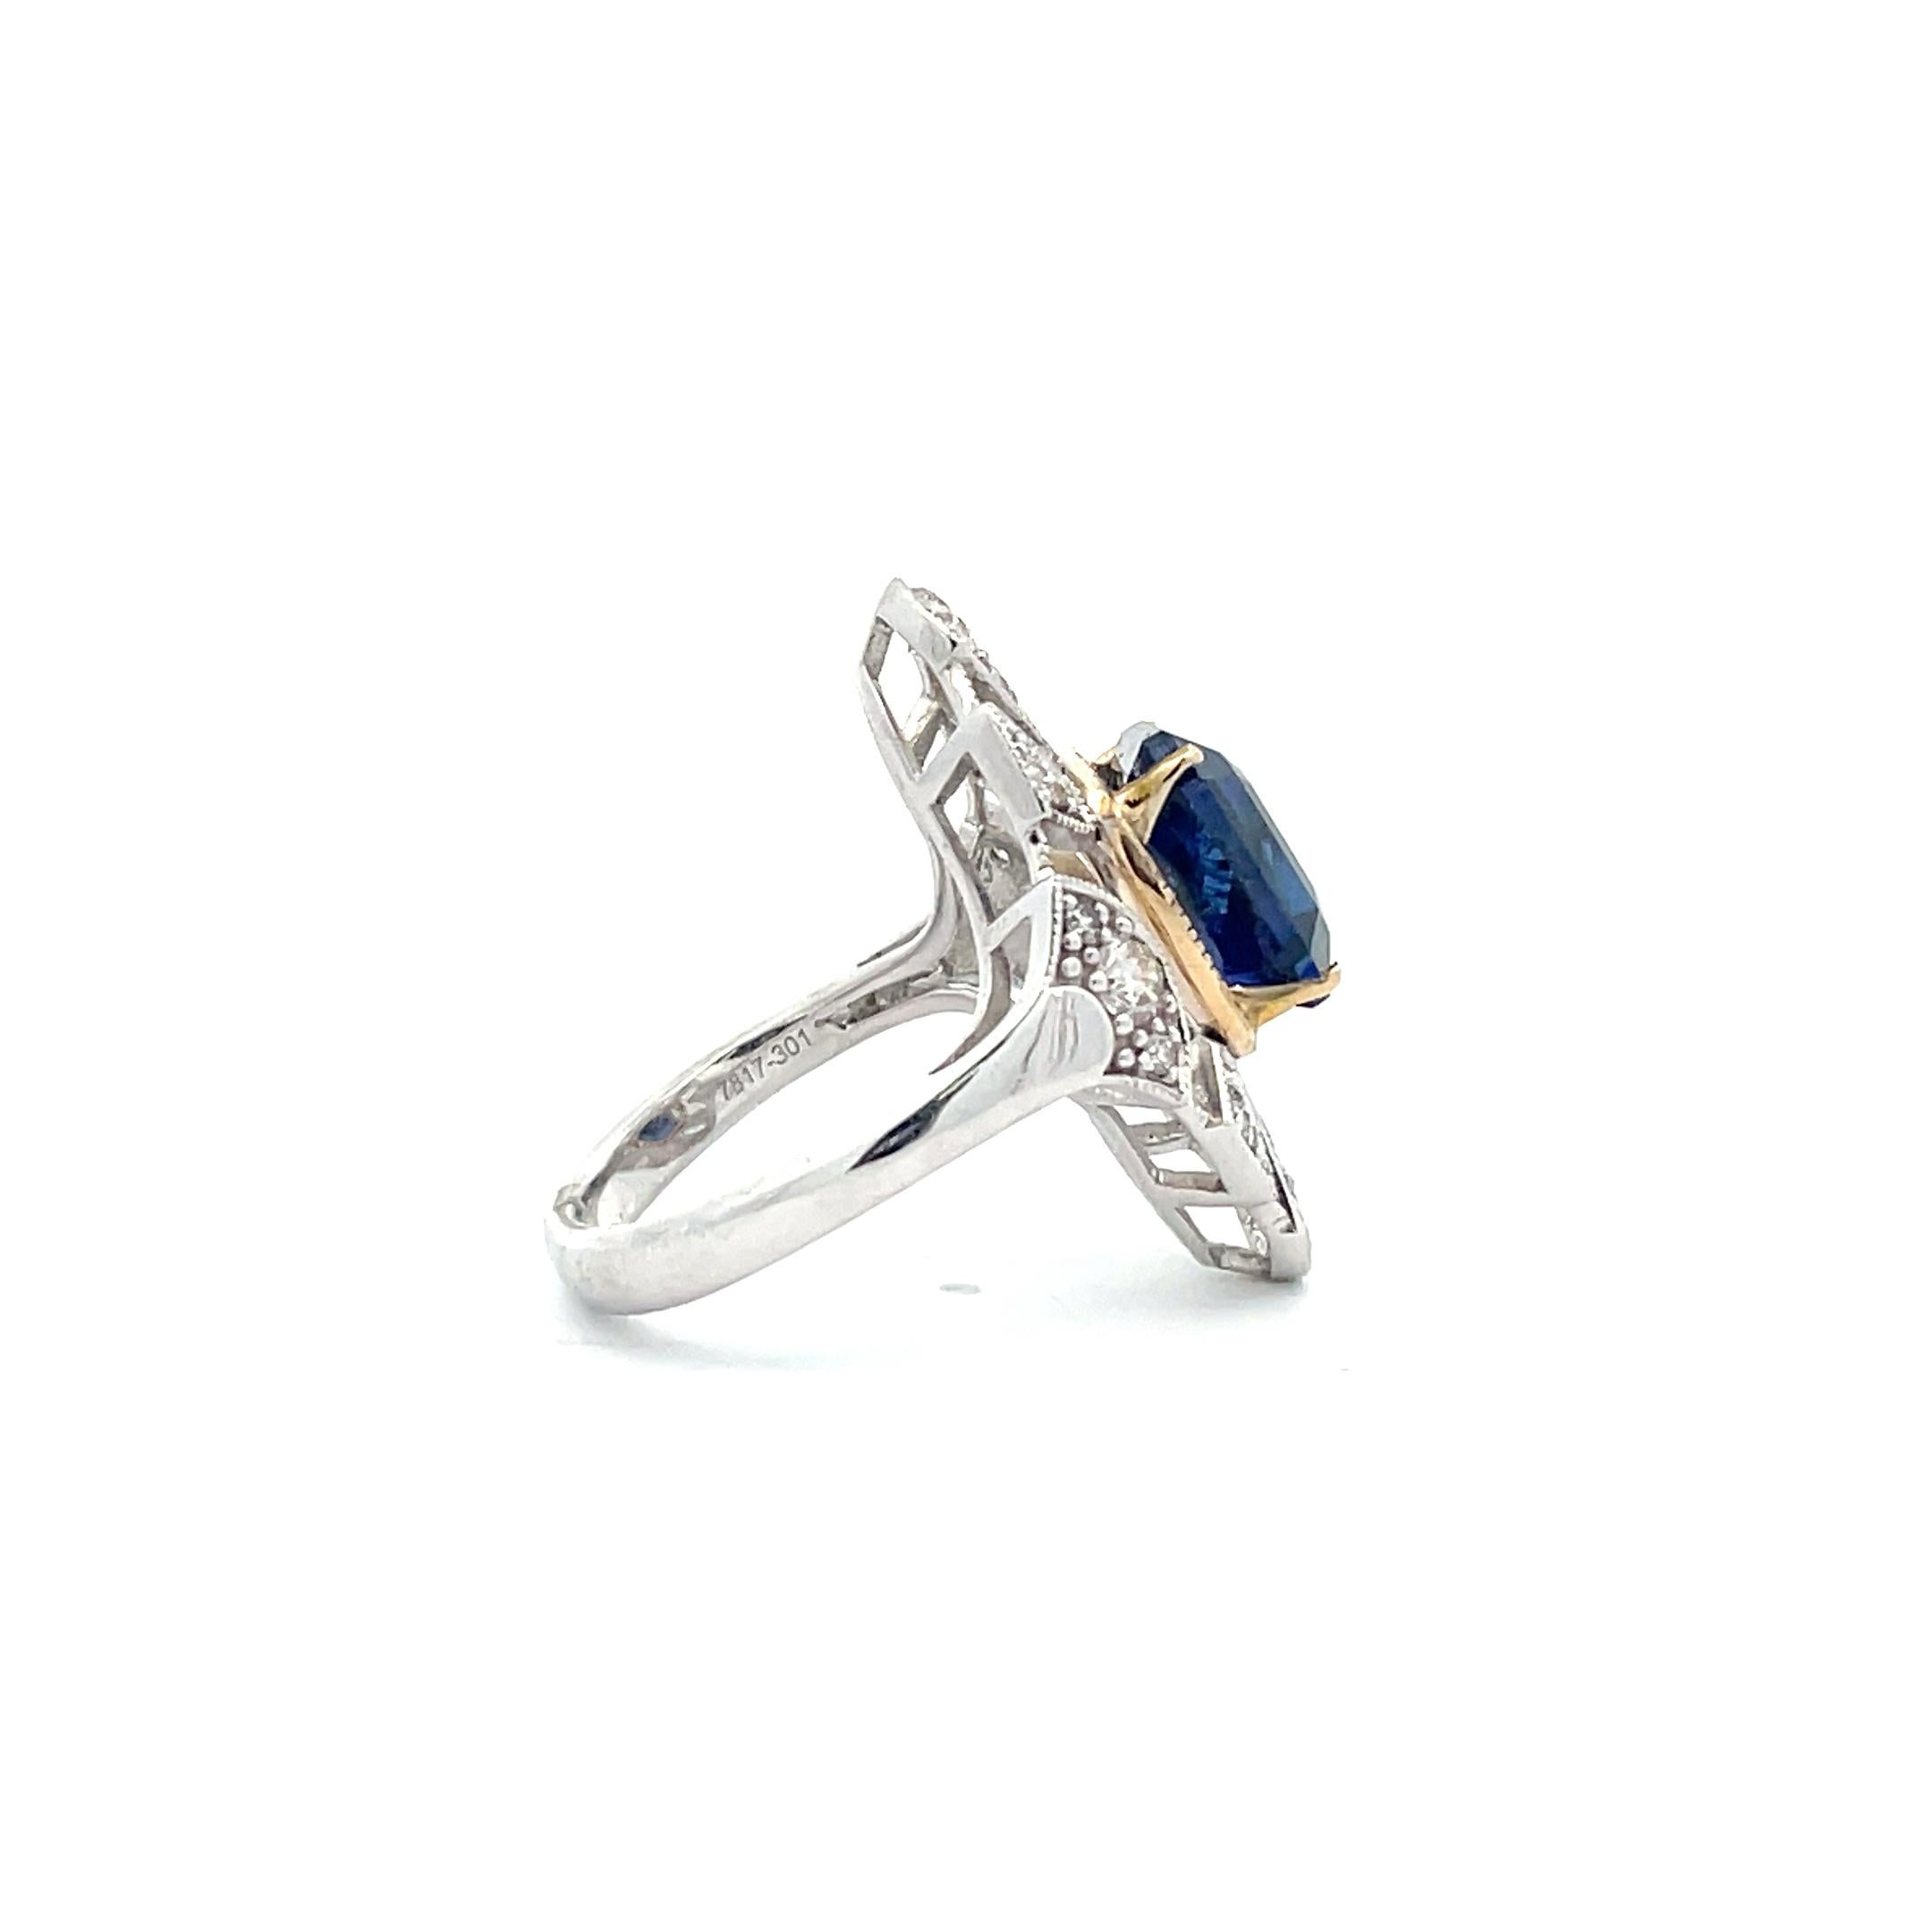 A true symbol of love, the majestic Sapphire ring features a 6.78 ct. cushion-cut center stone surrounded by an elegant diamond halo. Crafted by one of our professional artisans, this elegant ring is handcrafted with 14K White Gold and Yellow Gold